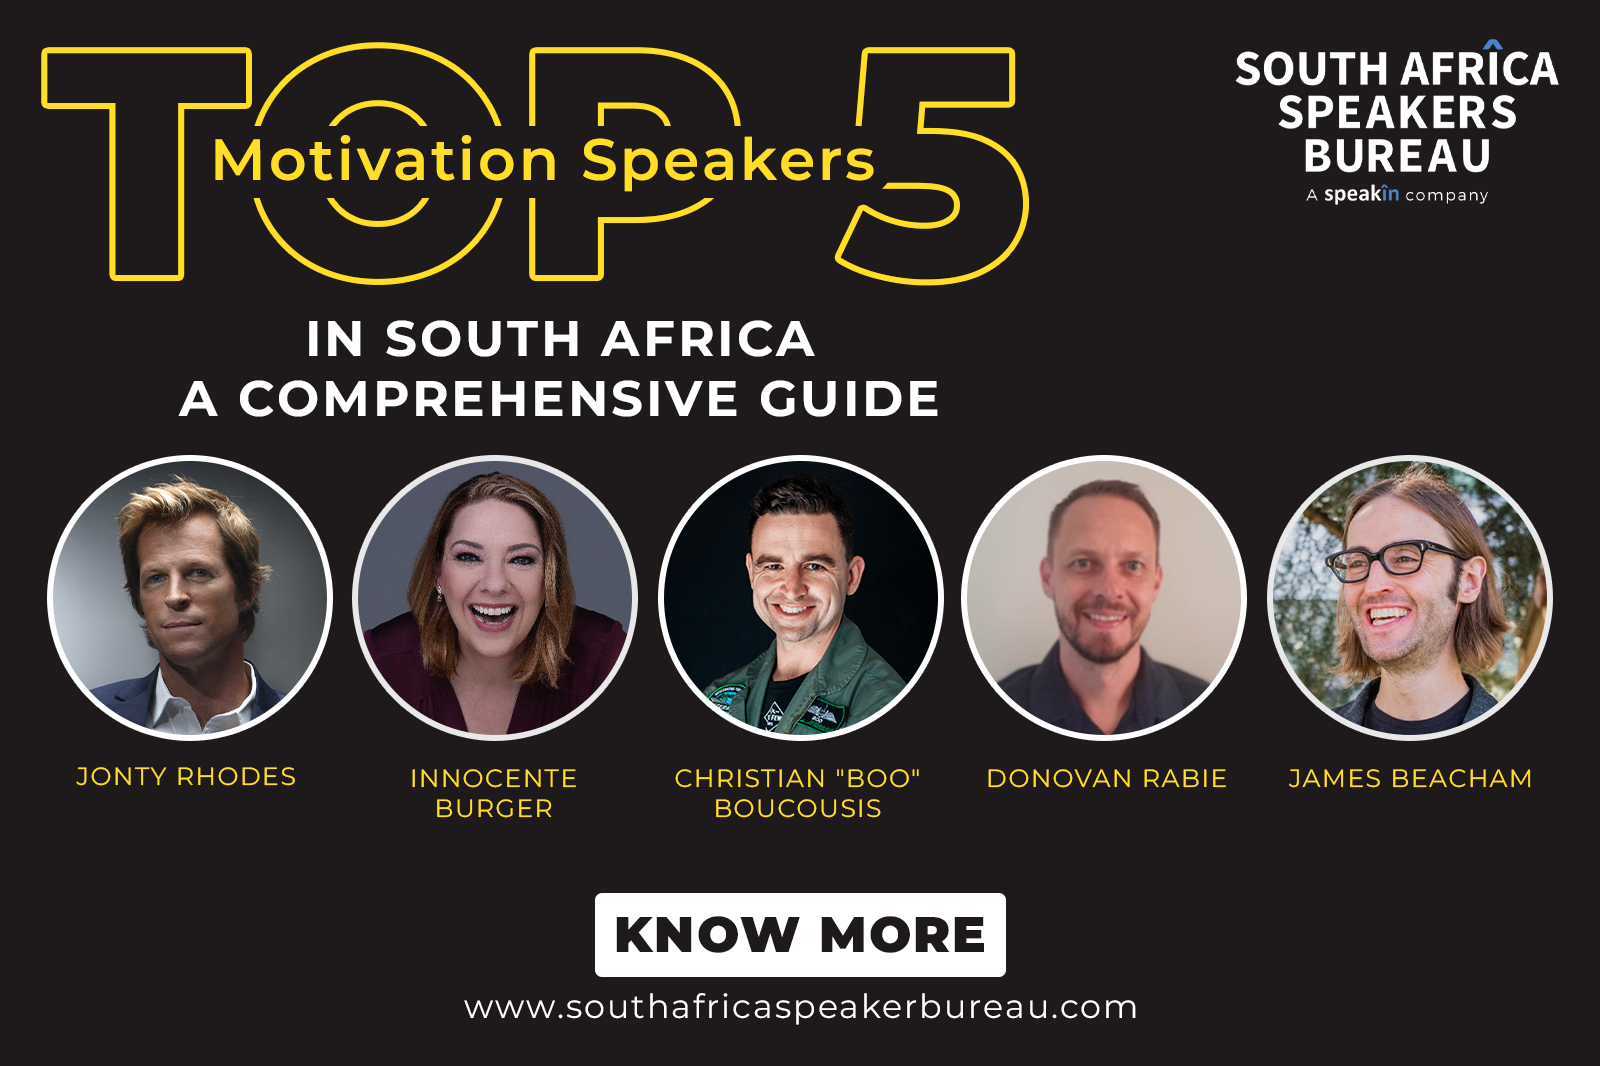 Top 5 Motivational Speakers in South Africa: A Comprehensive Guide